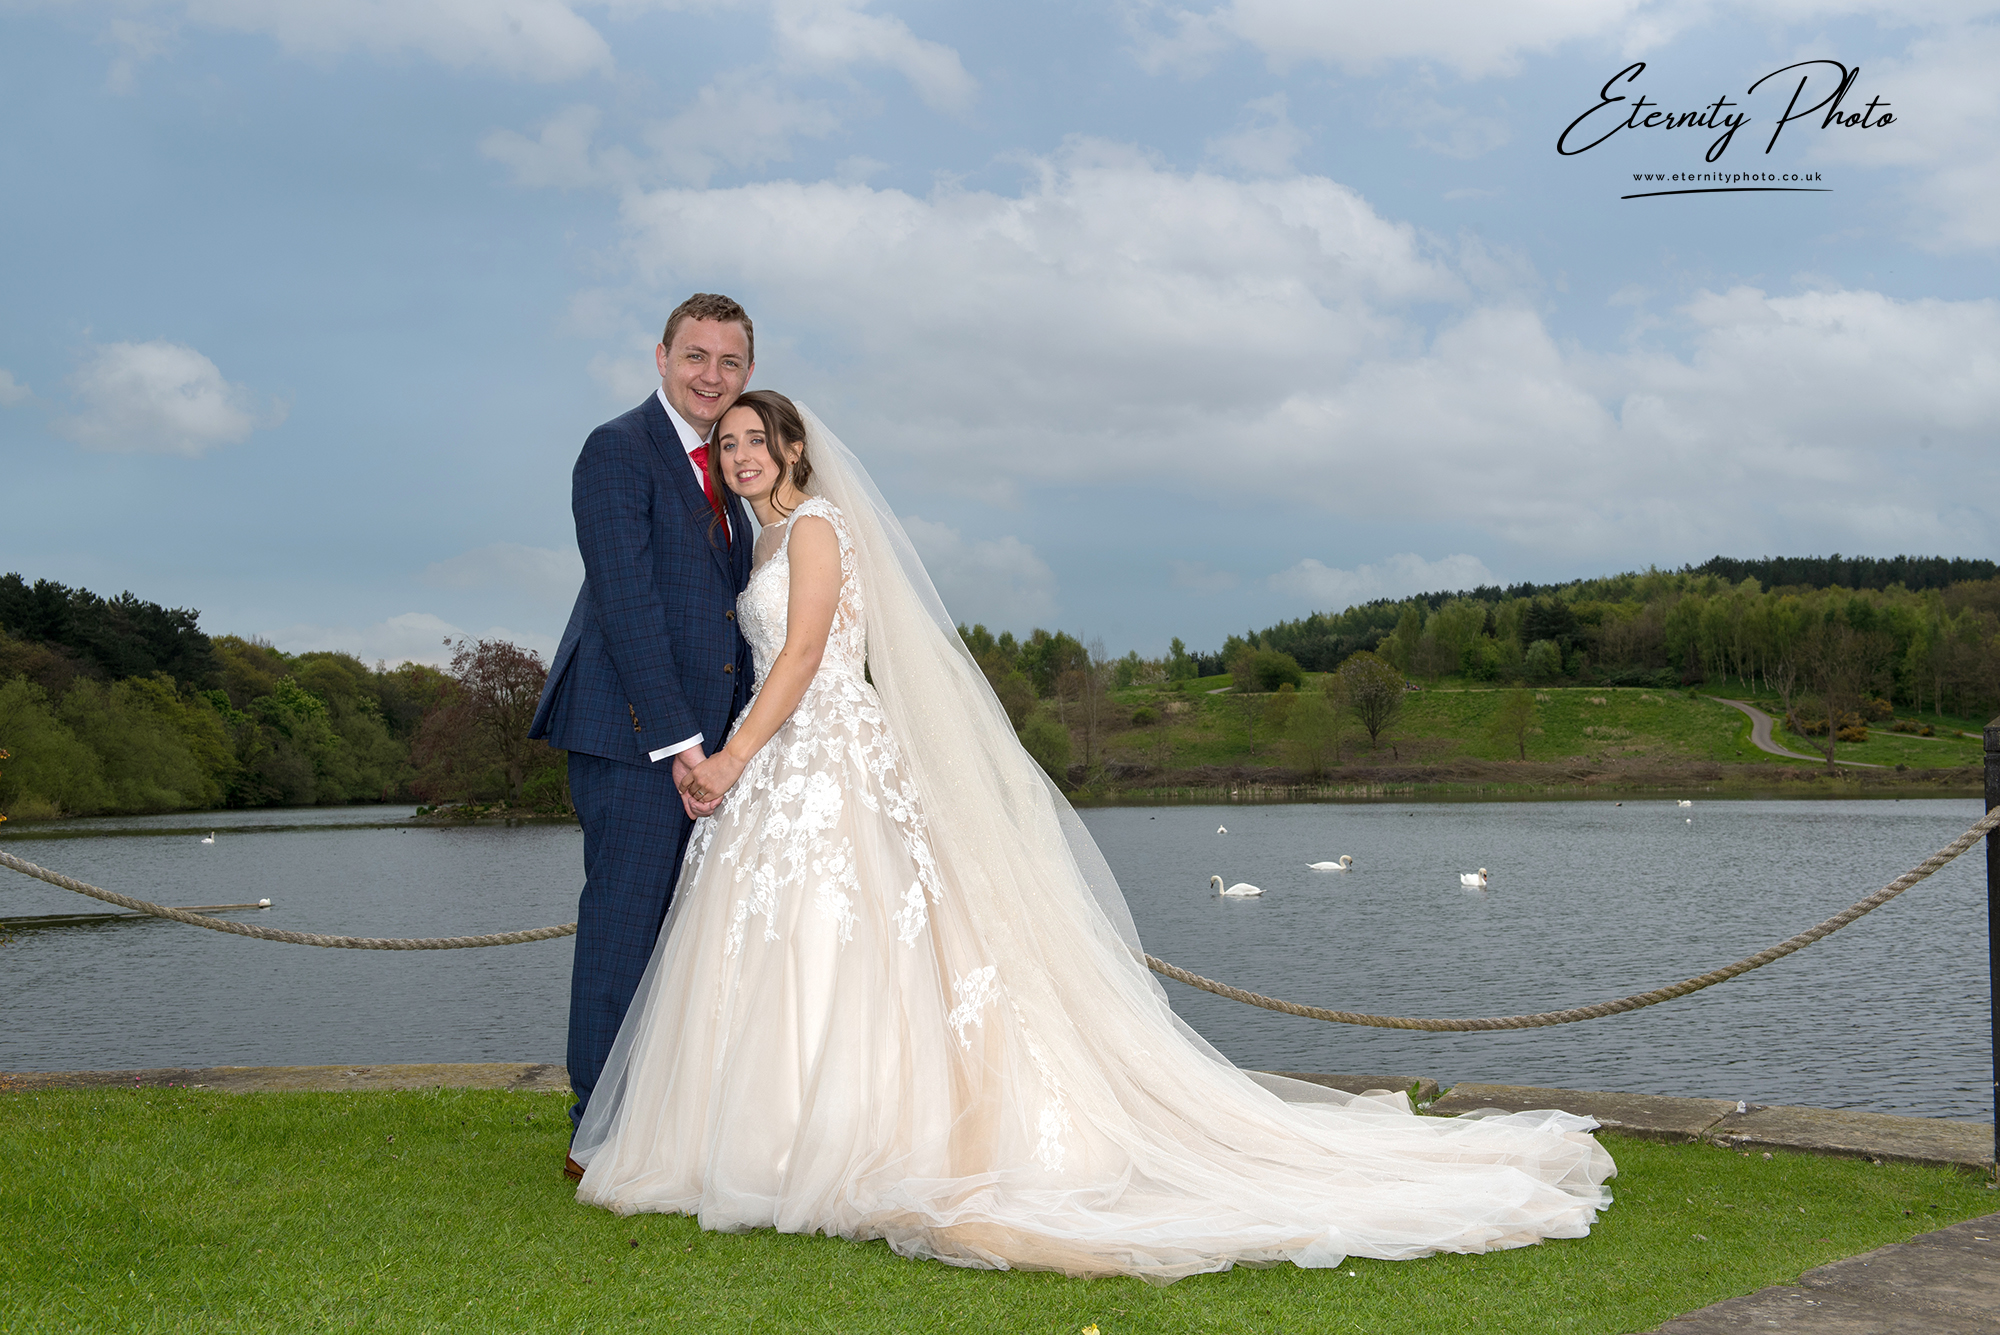 Couple at lakeside wedding with swans in background.